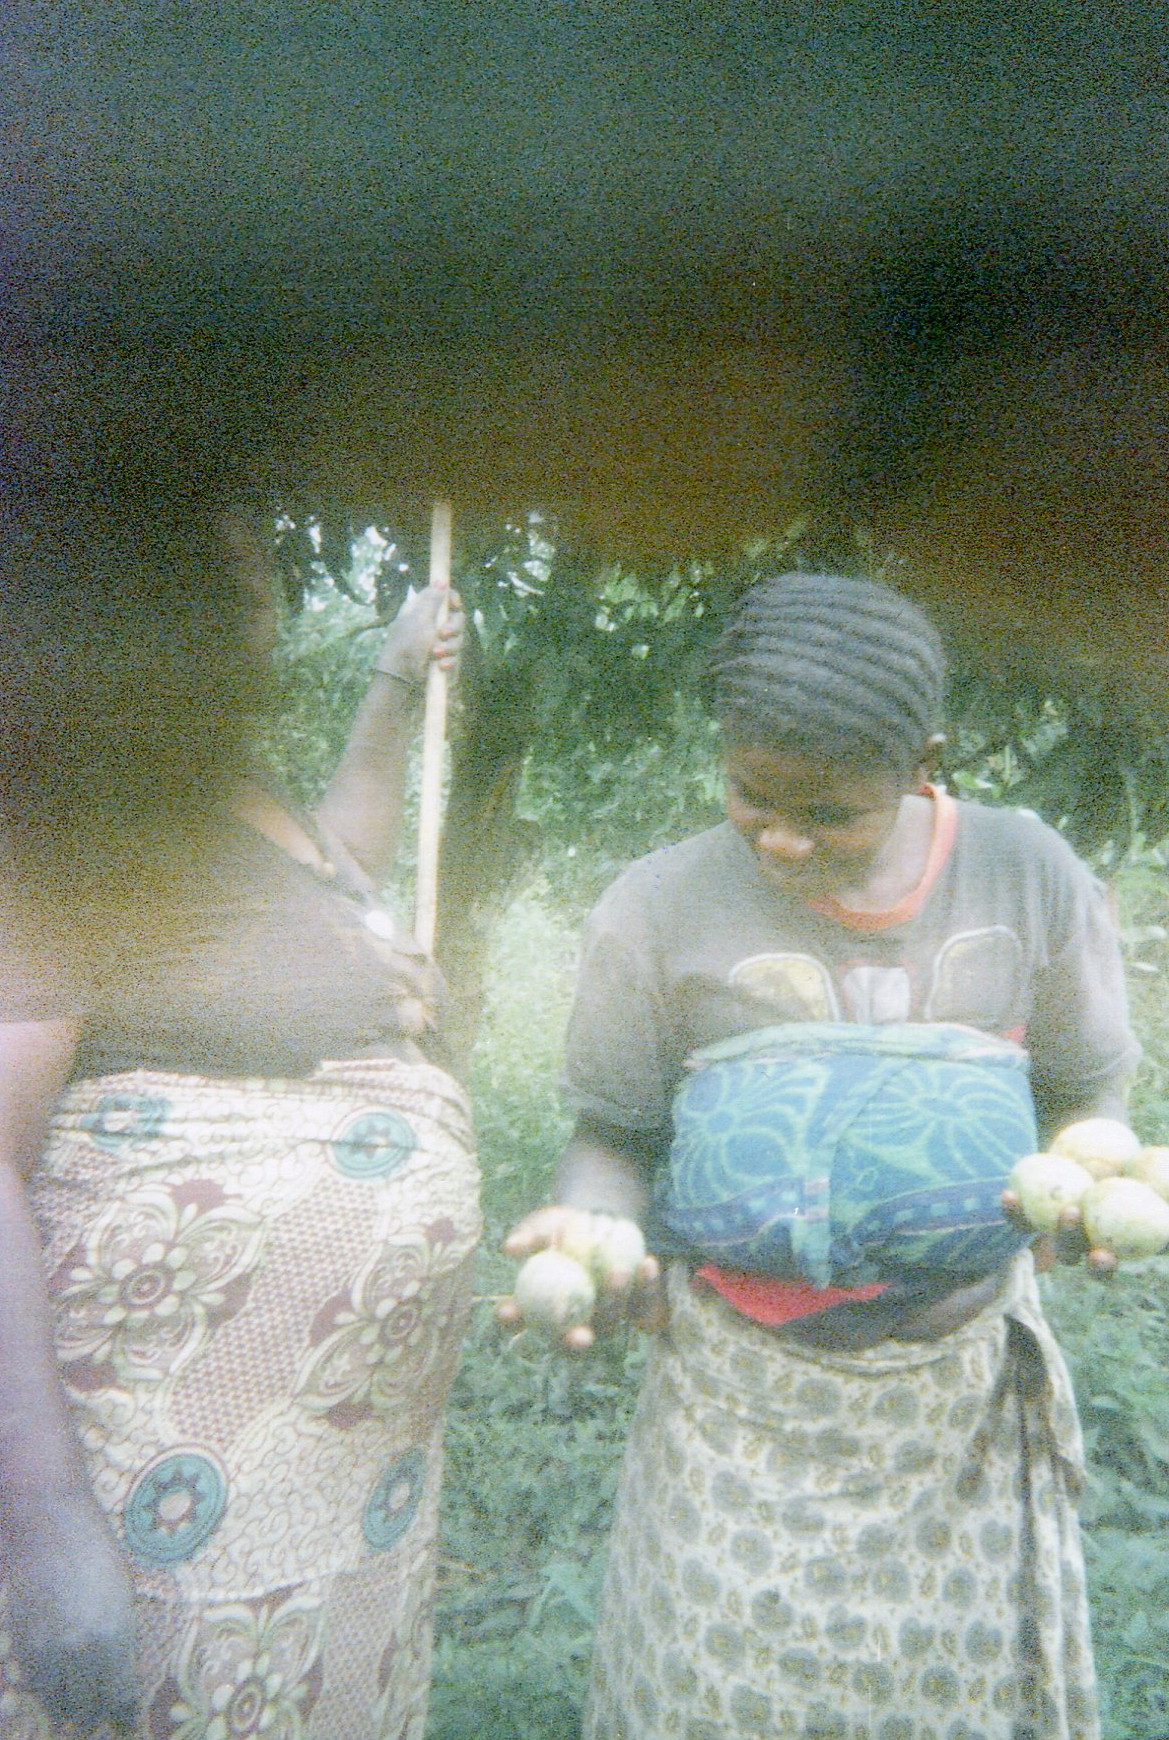  The women cook the fruits in the bush to feed their families.&nbsp; 